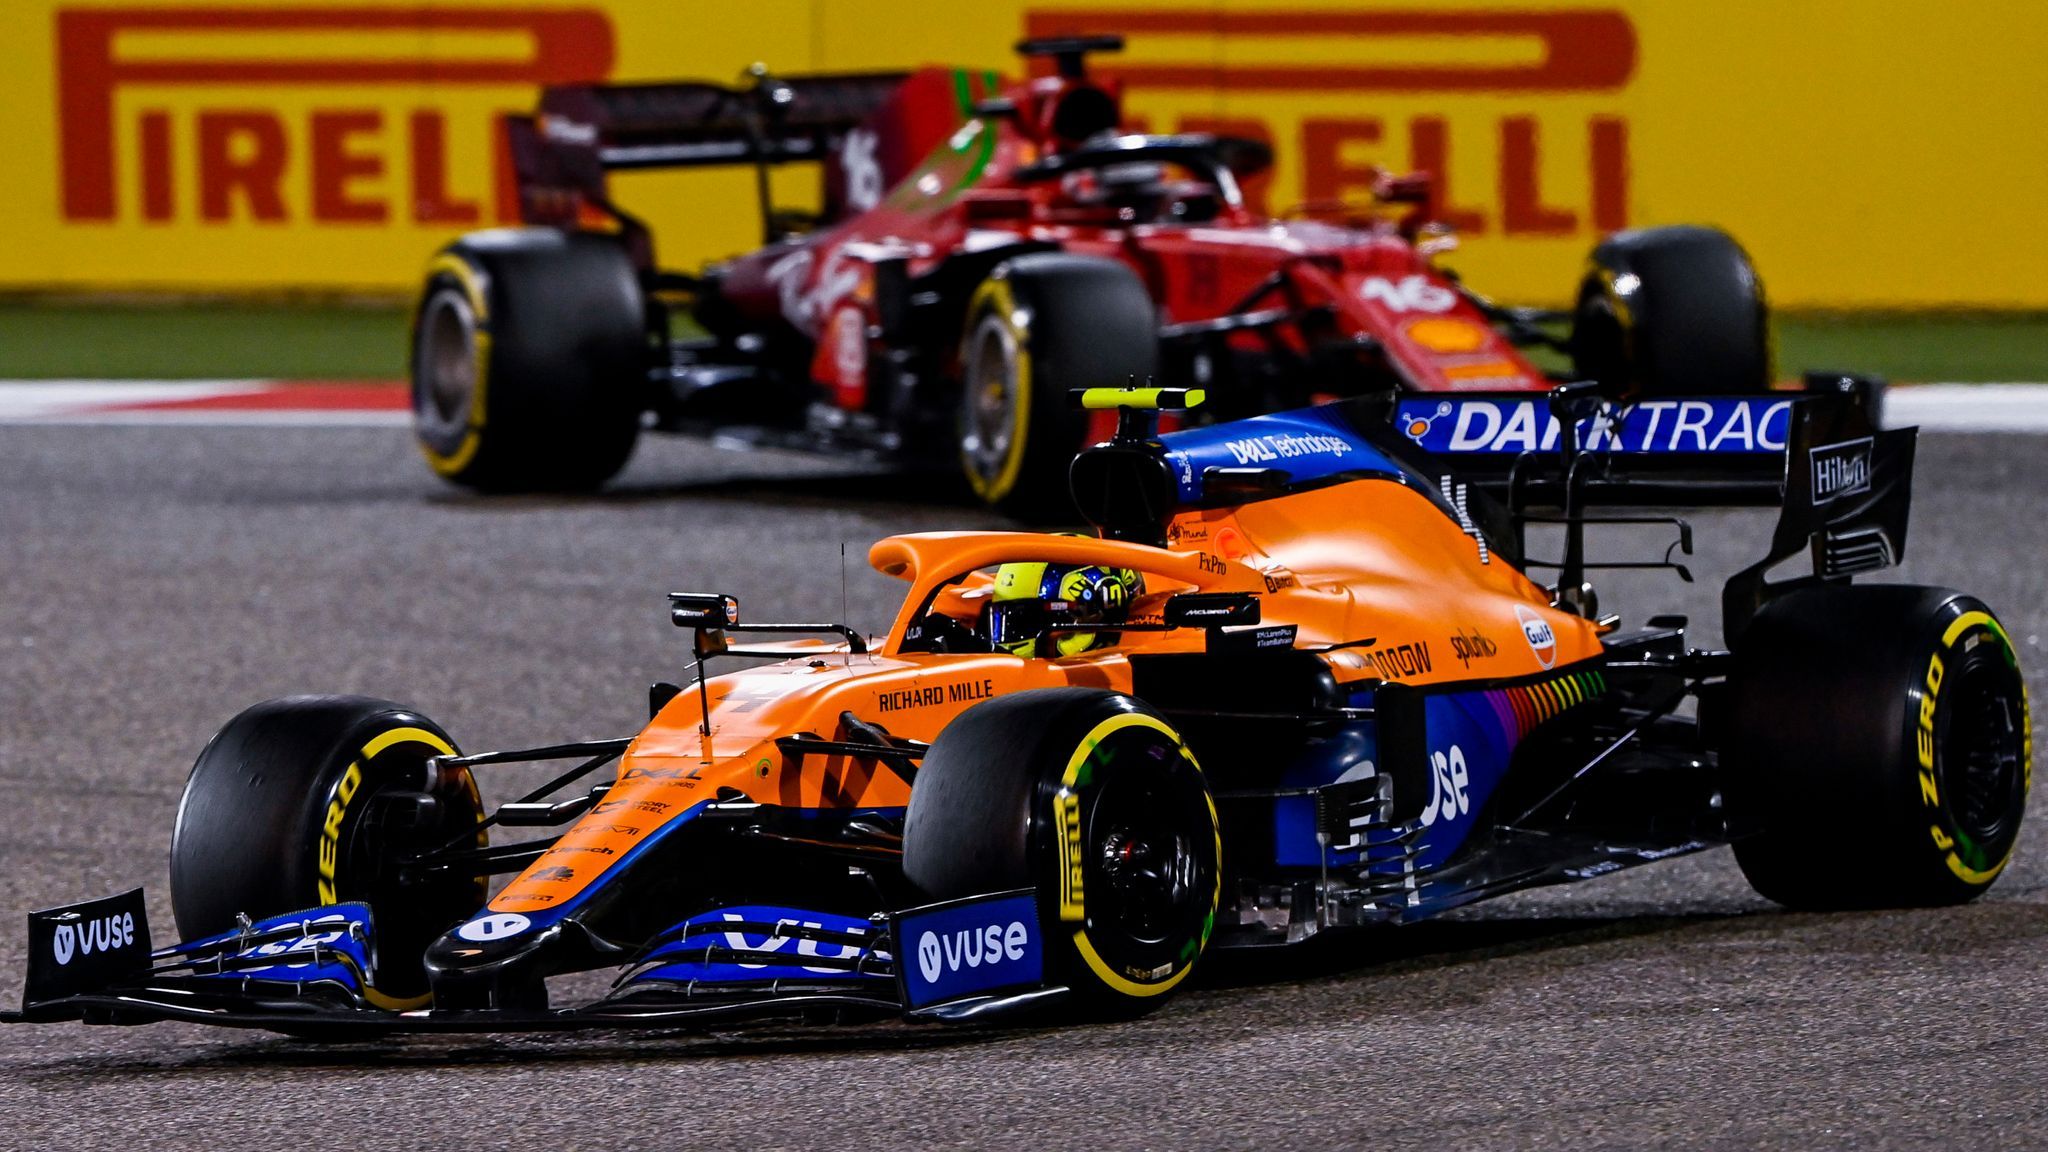 McLaren and Ferrari's new F1 battle: Mark Hughes on how the historic titans compare at the start of 2021